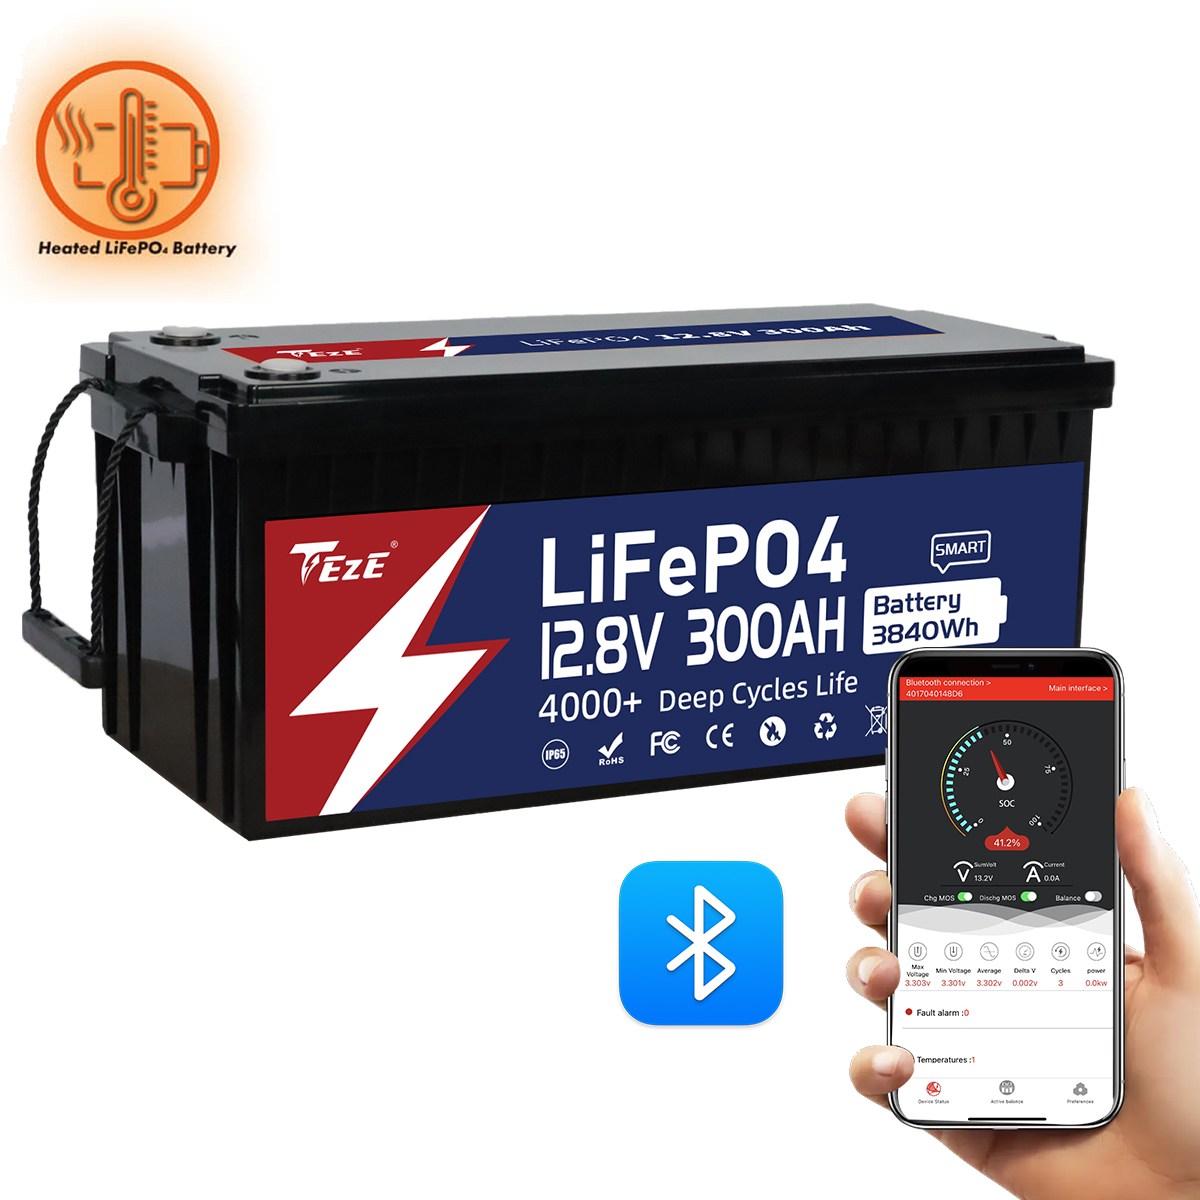 TezePower 12V 300Ah LiFePO4 Battery with Bluetooth, Self-heating and Active Balancer, Built-in 200A Daly BMS(Bluetooth Built-in Version)